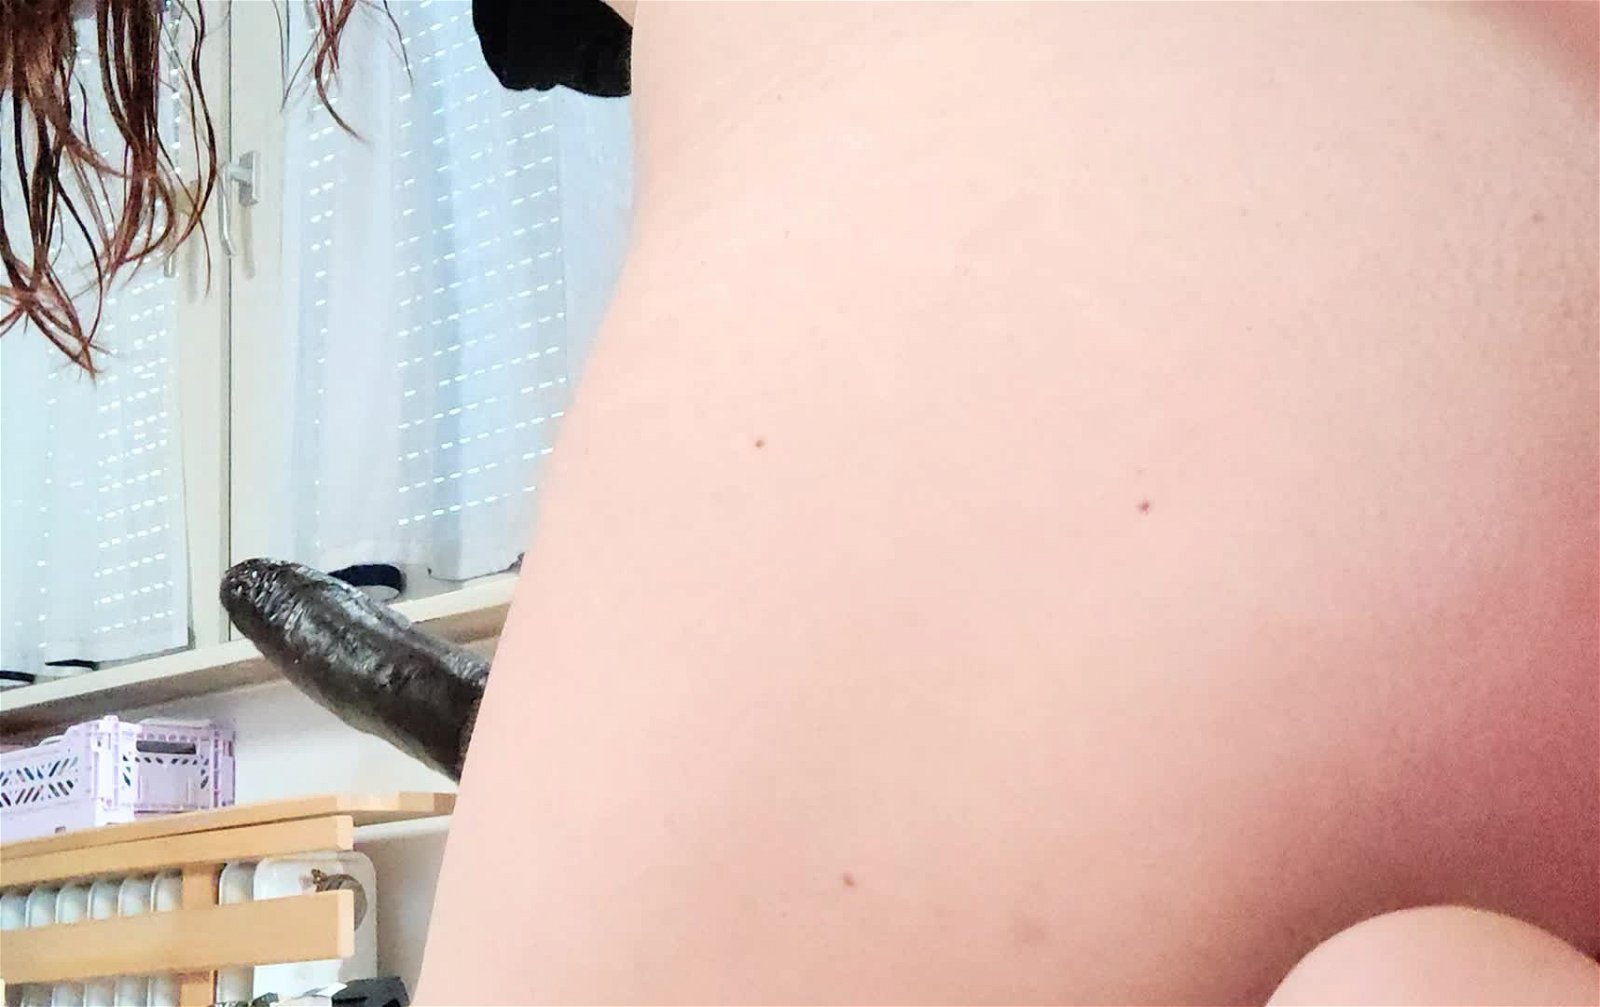 Shared Video by Royal.Slut with the username @Royal.Slut,  June 5, 2023 at 3:35 PM. The post is about the topic AssUp Sissy